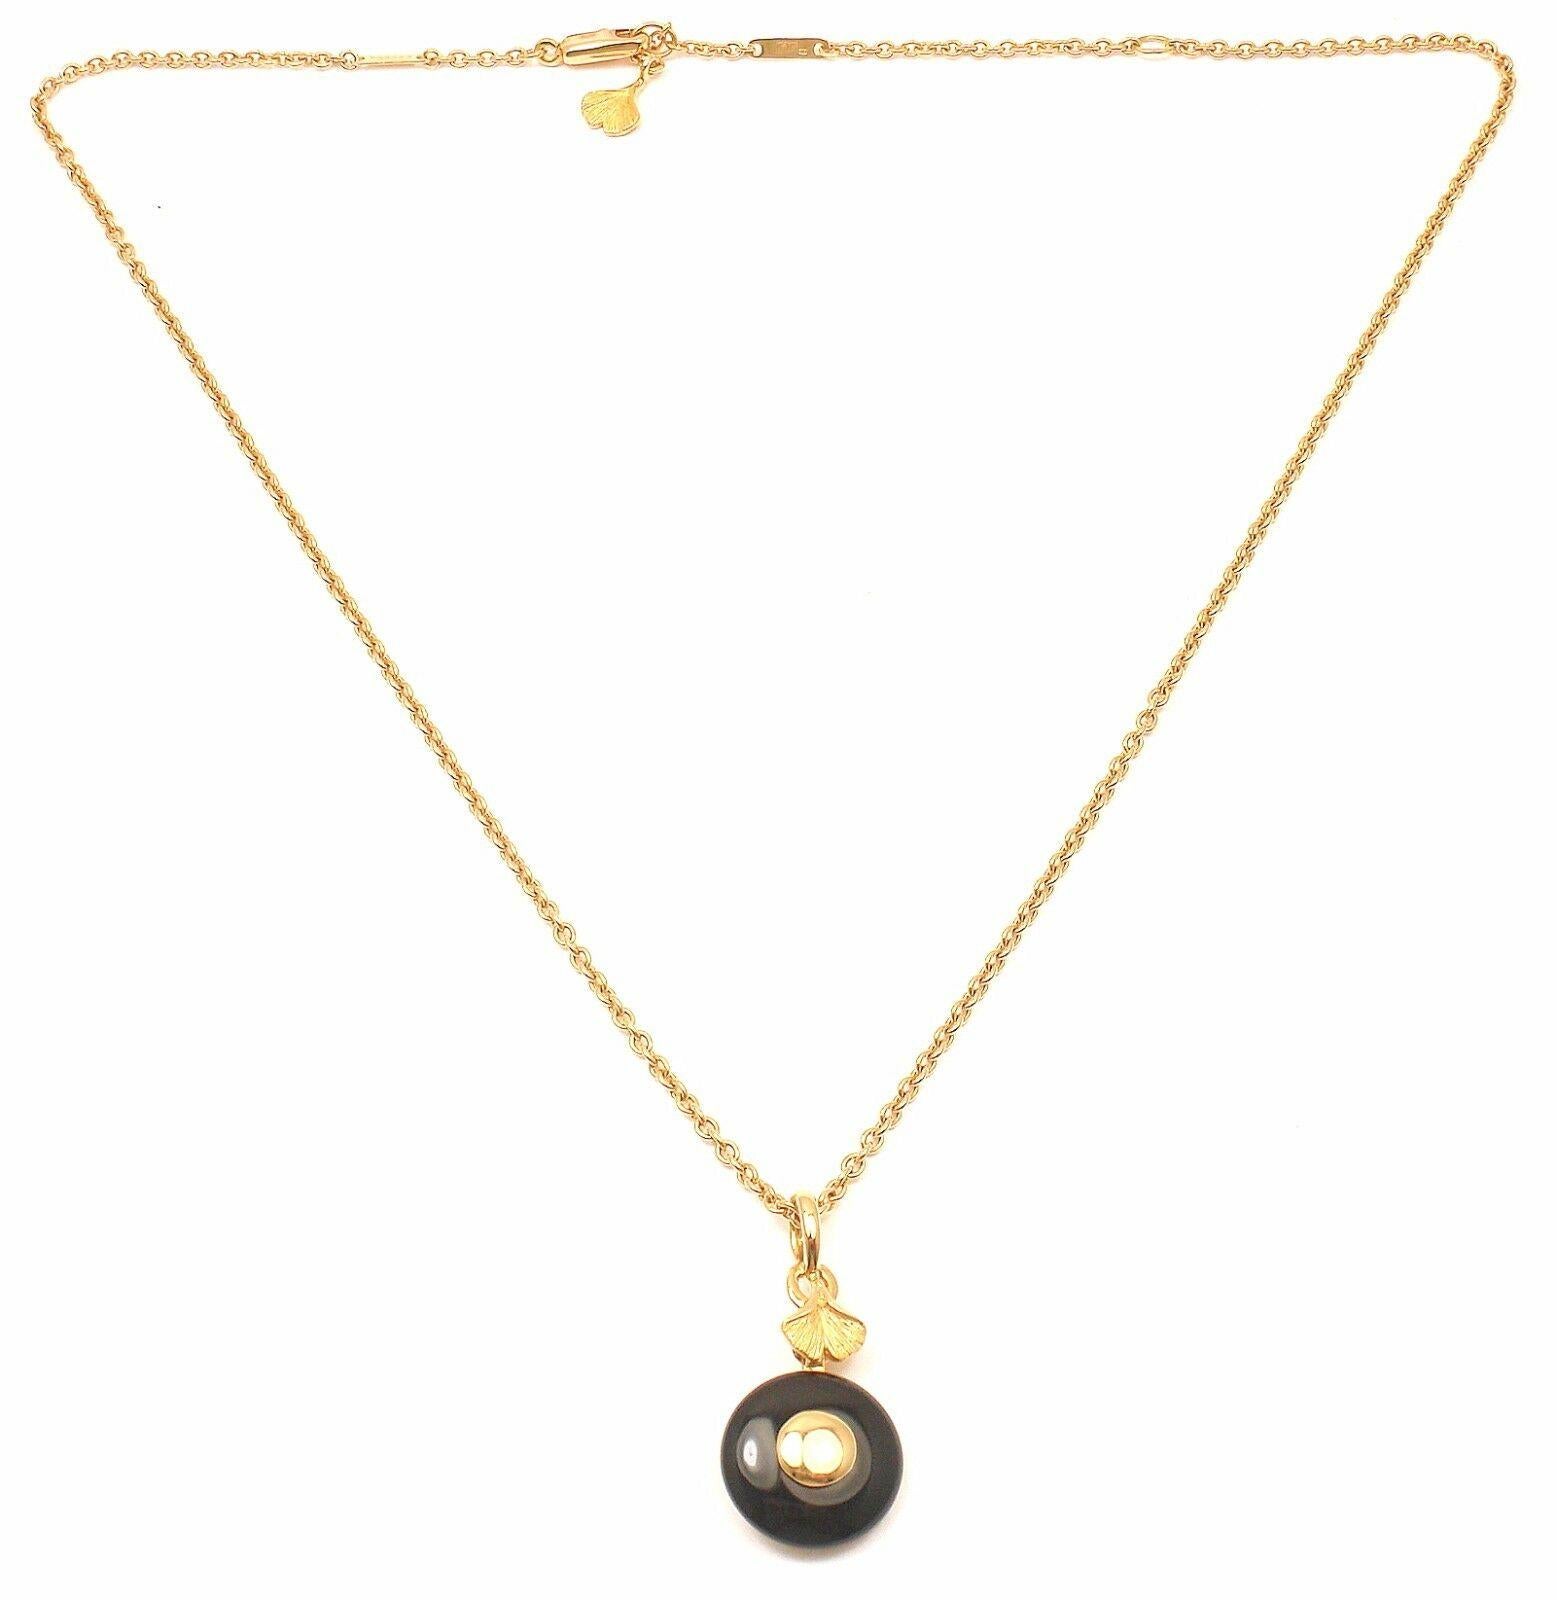 18k Yellow Gold Black Onyx Ginkgo Pendant Necklace by Carrera Y Carrera.
Details:
Measurements:
Weight: 10.2 grams
Length: 18